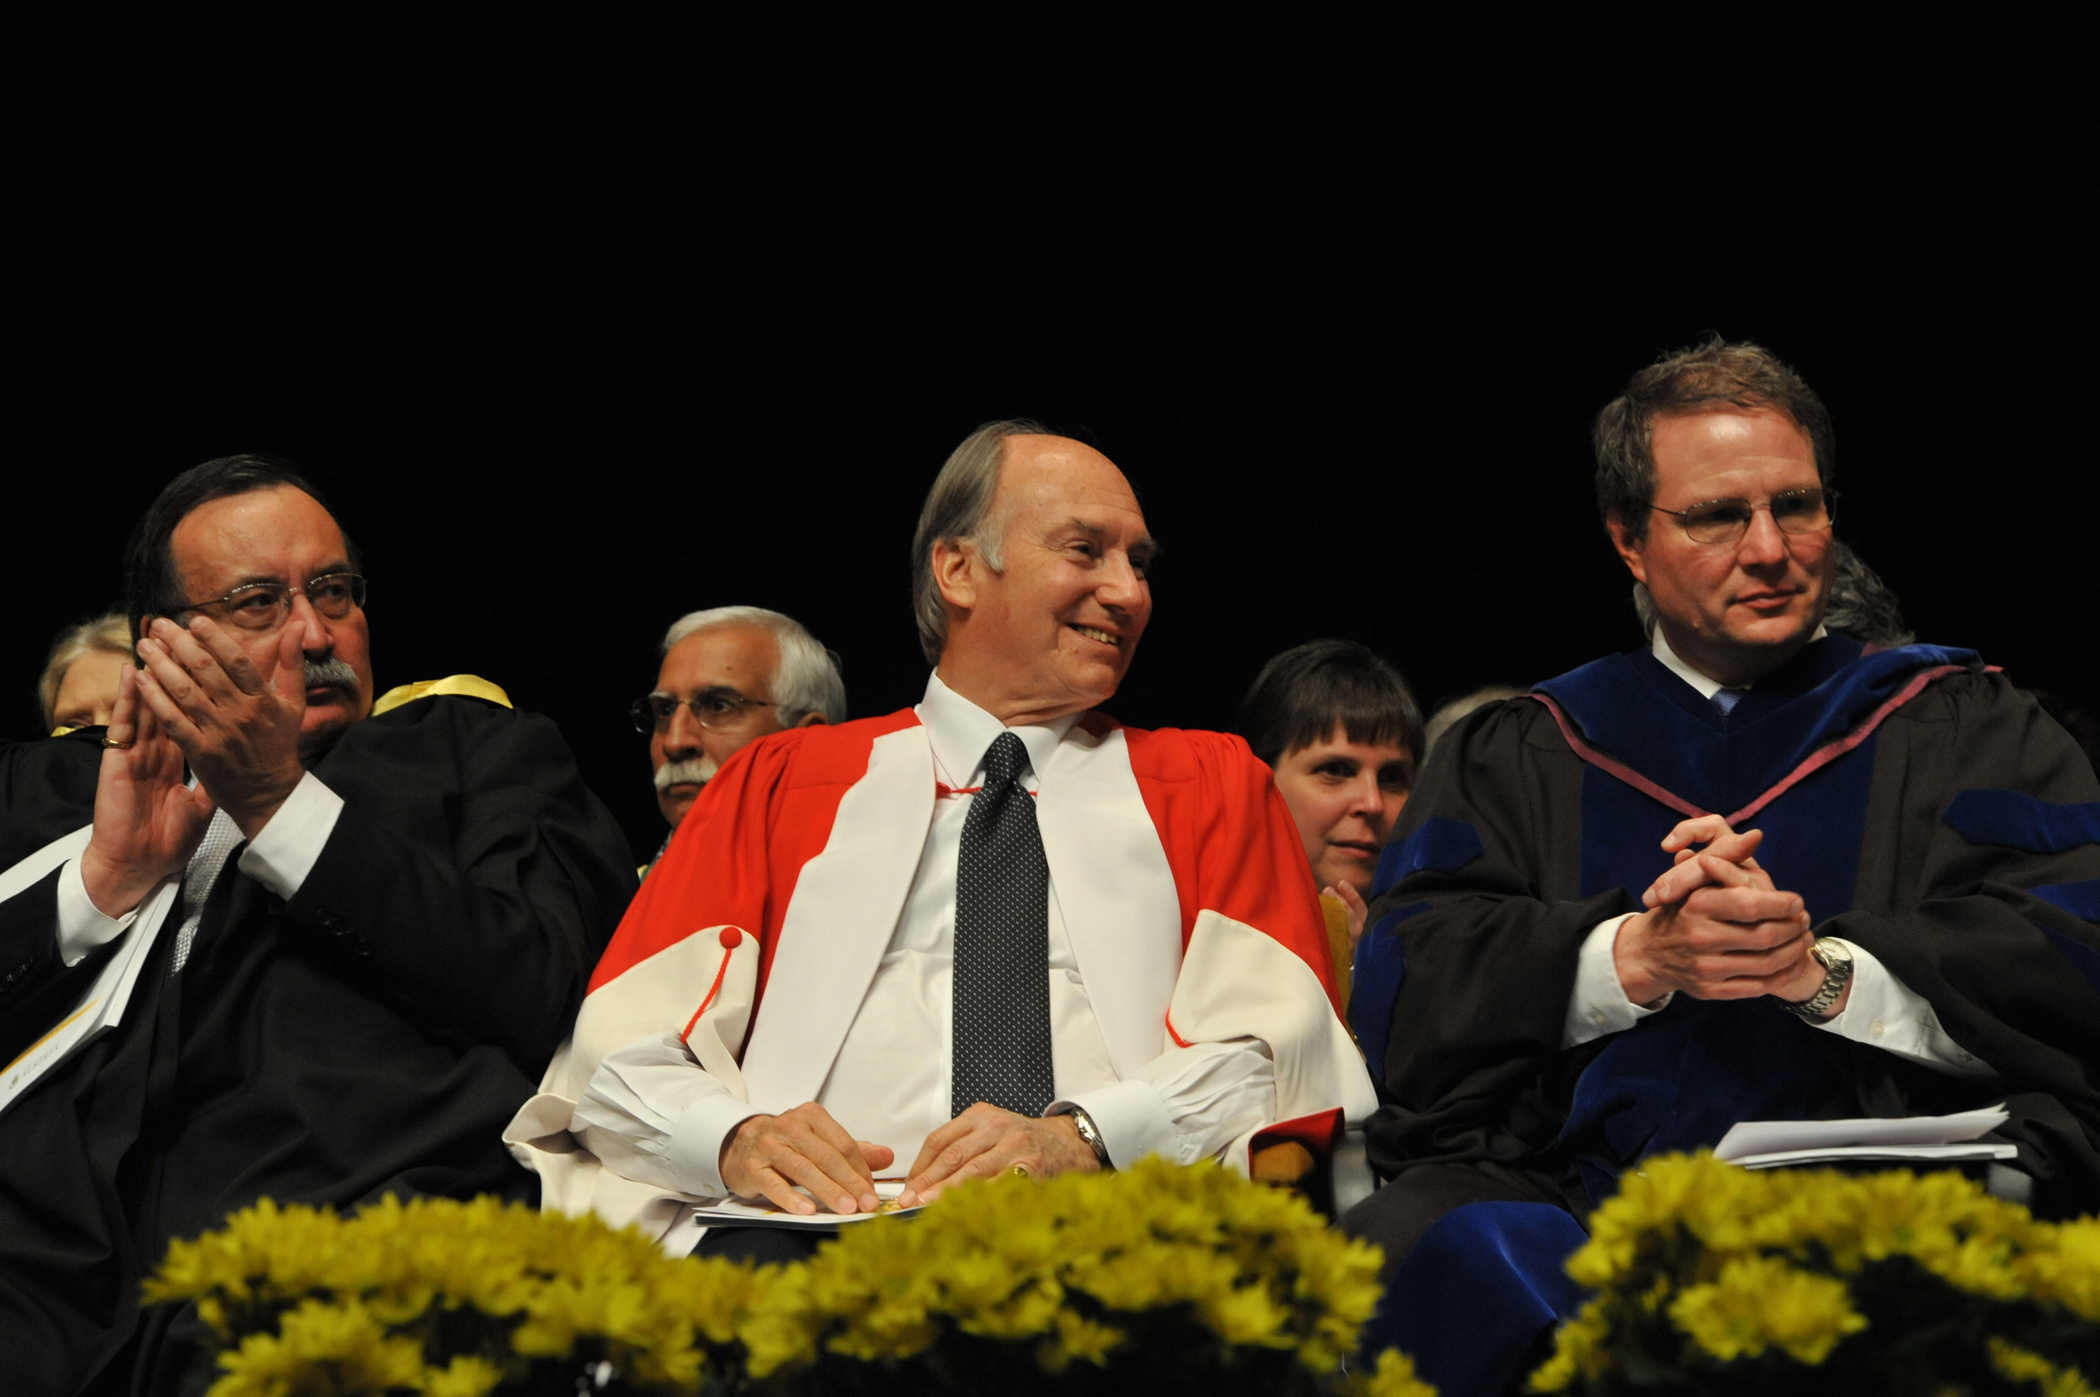 Mawlana Hazar Imam at the University of Alberta Convocation ceremony where he was conferred an Honorary Doctor of Laws degree. Photo: Moez Visram